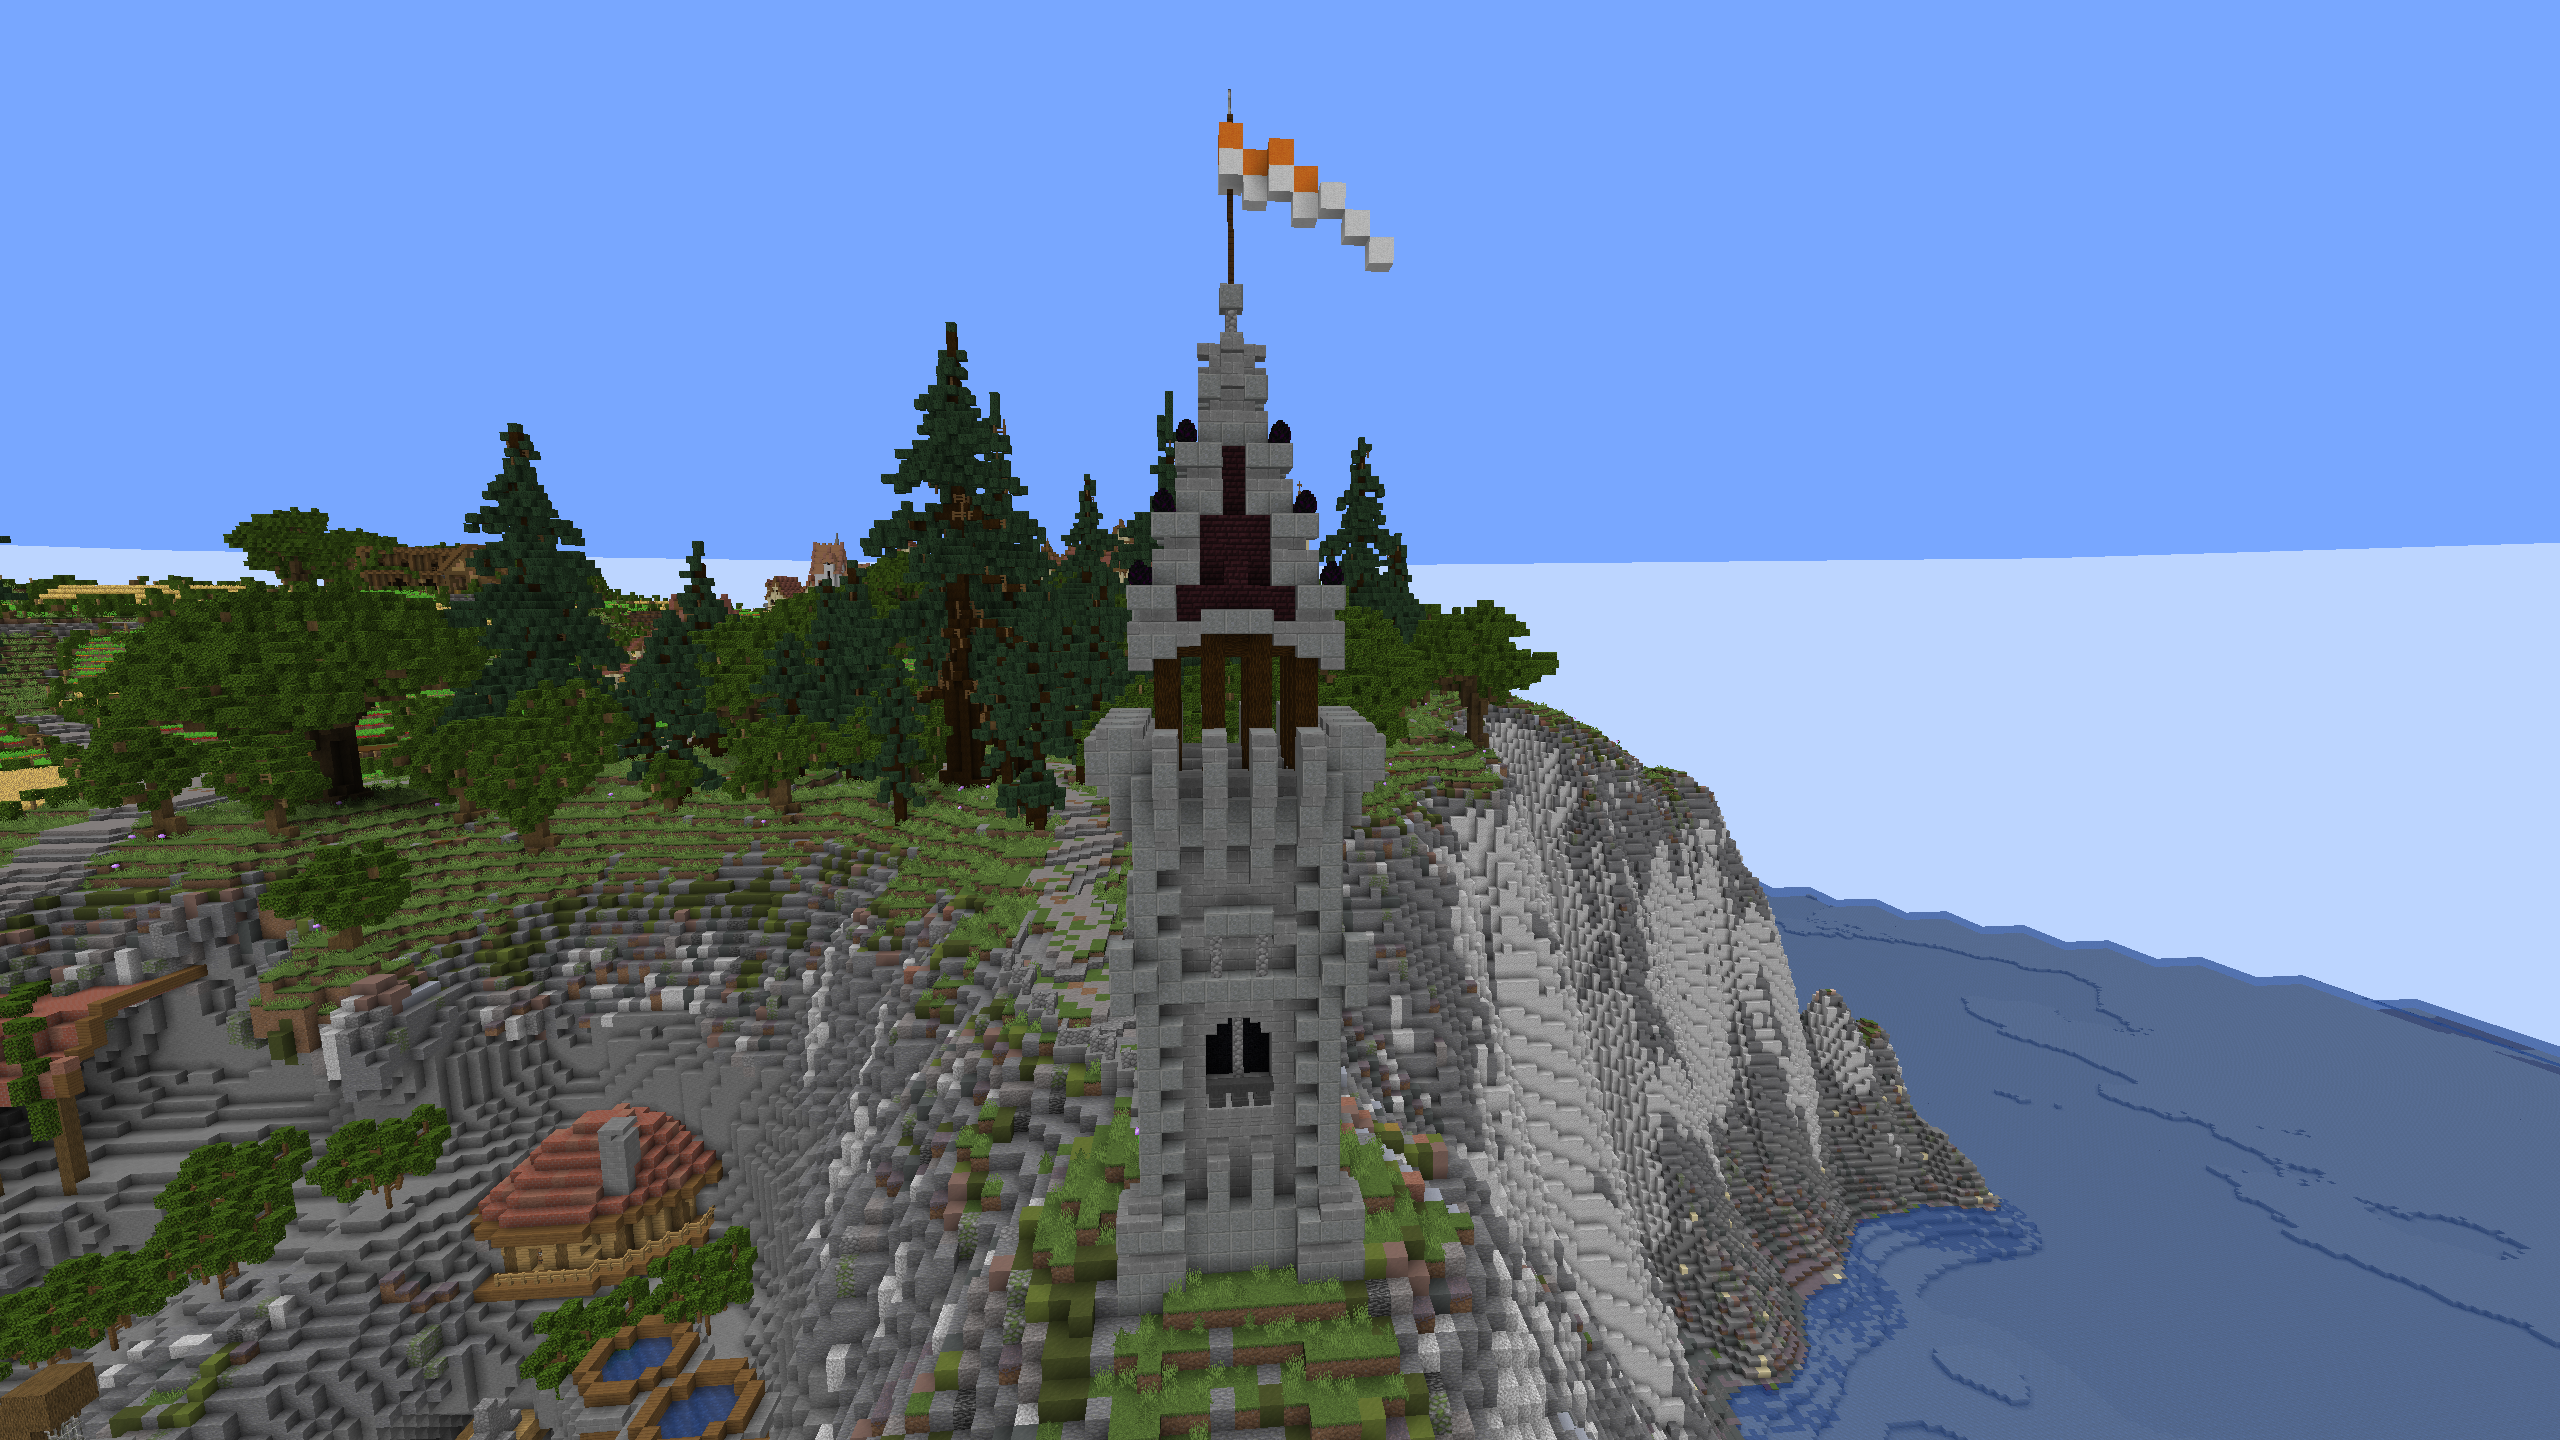 Minecract Medieval Lighthouse Tower schematic (litematic)